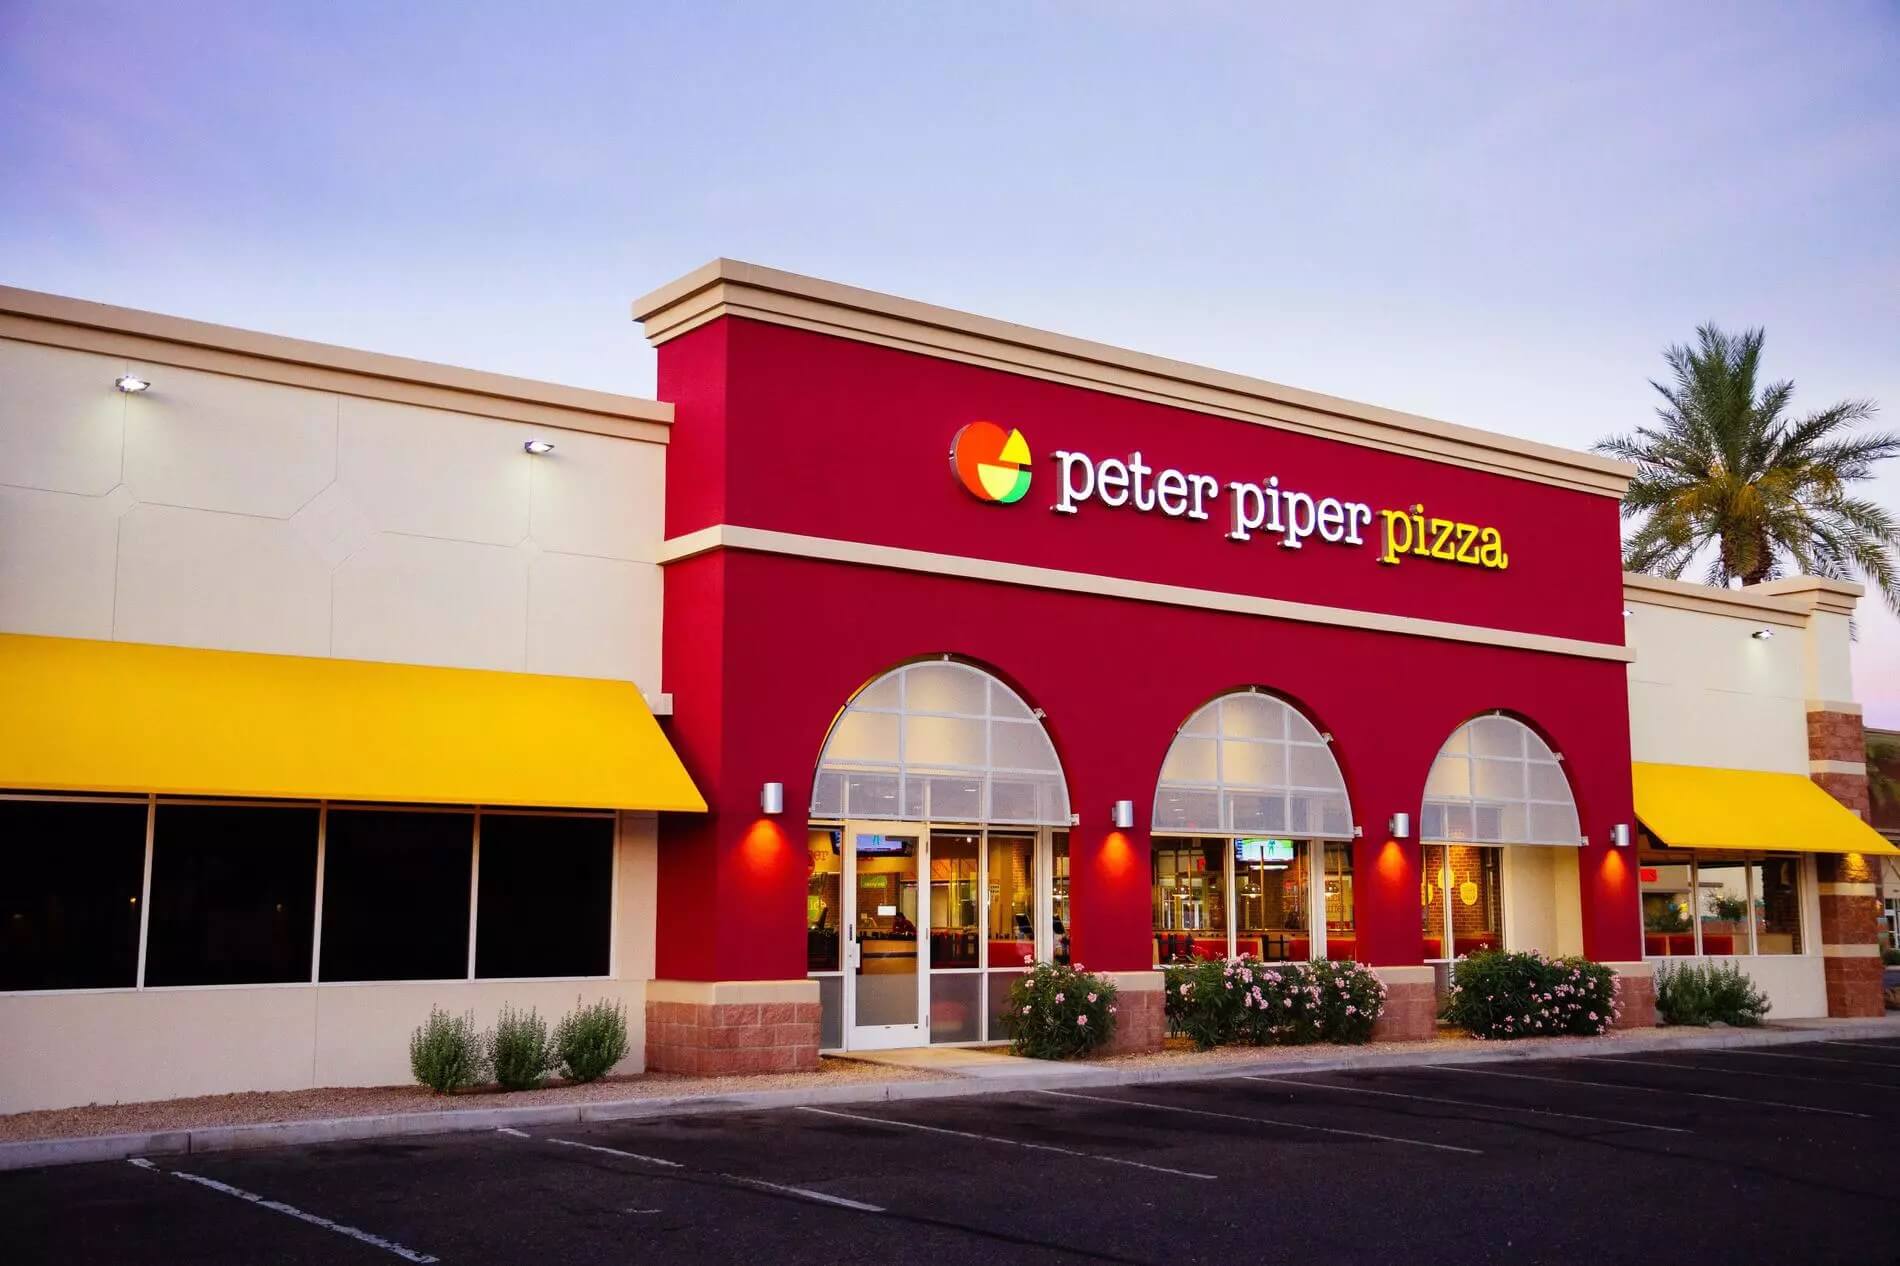 Eagle Pass Pizza & Kids Birthday Parties | Peter Piper Pizza Location #4134